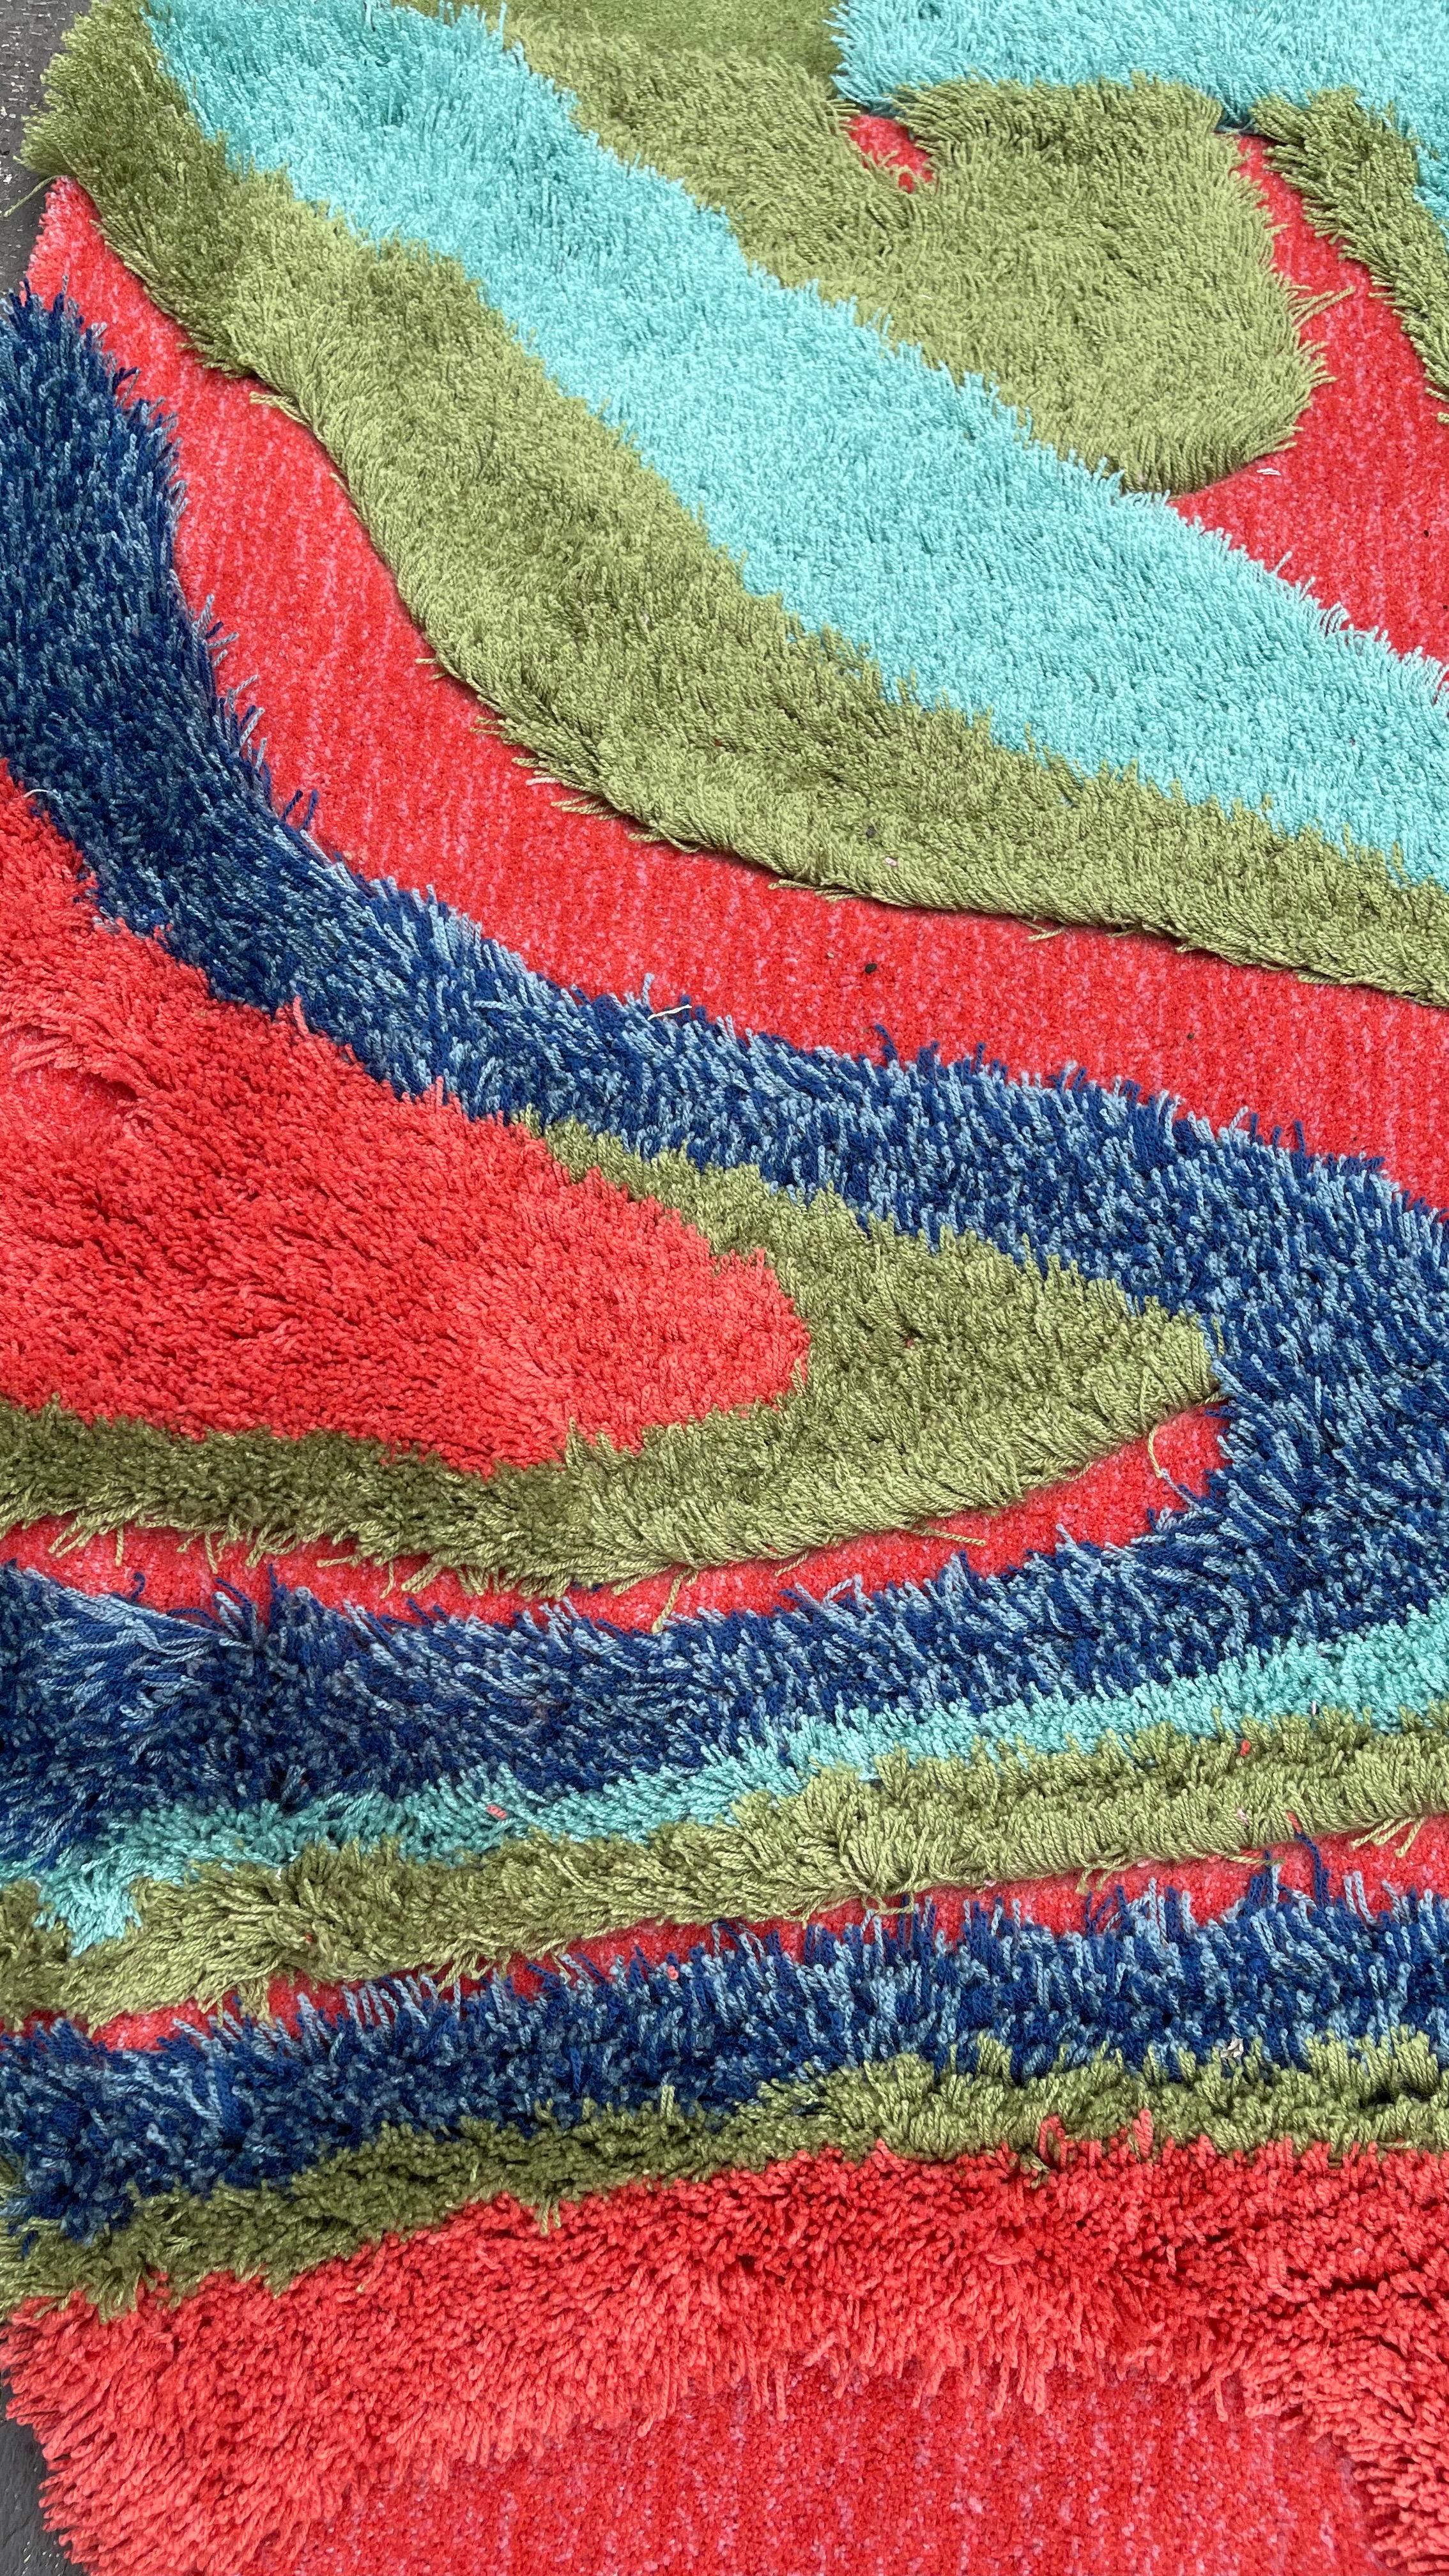 Modern Style Irregular Shape Rug with Pop Colours by RAG HOME

RAG HOME’s products are hand-tufted carpets and rugs inspired by Rannisa Soraya’s, the founder and creative director of the brand, love for travels, music, art and design. Taking